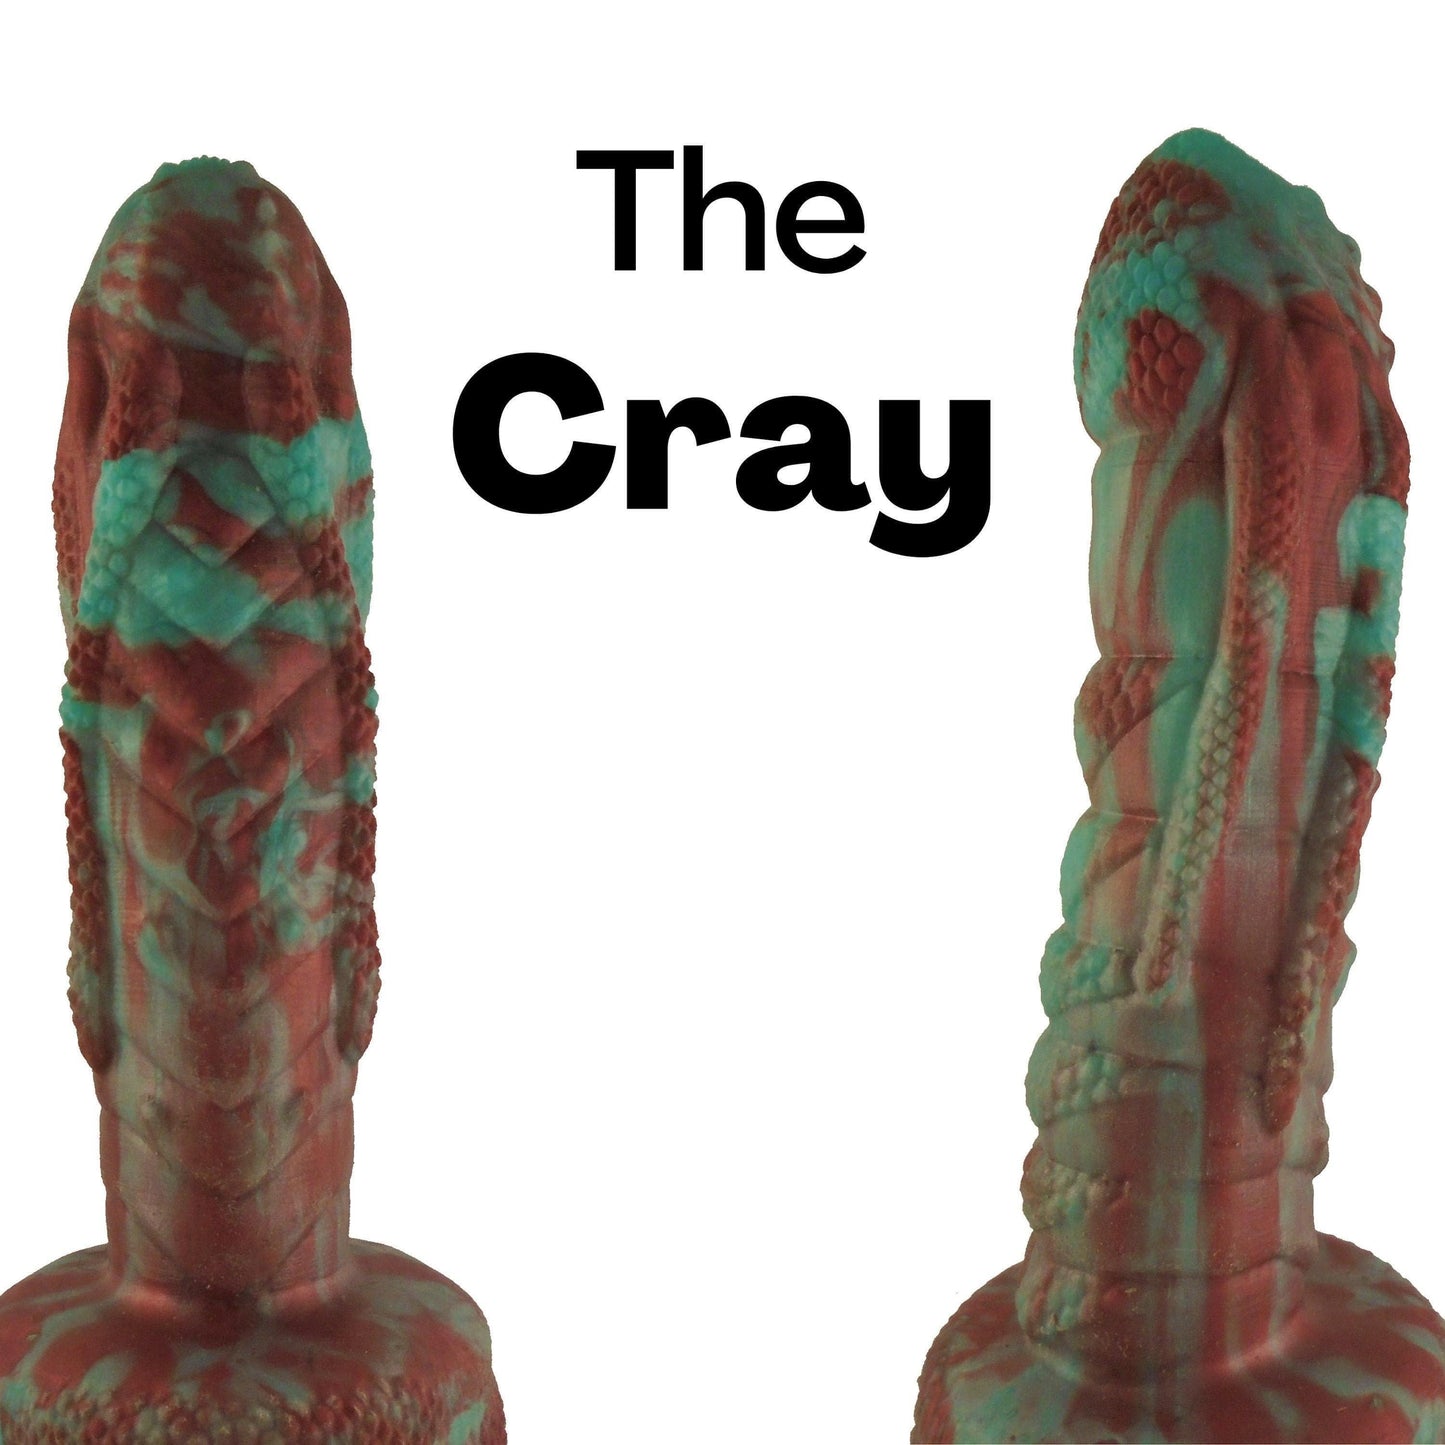 The Cray